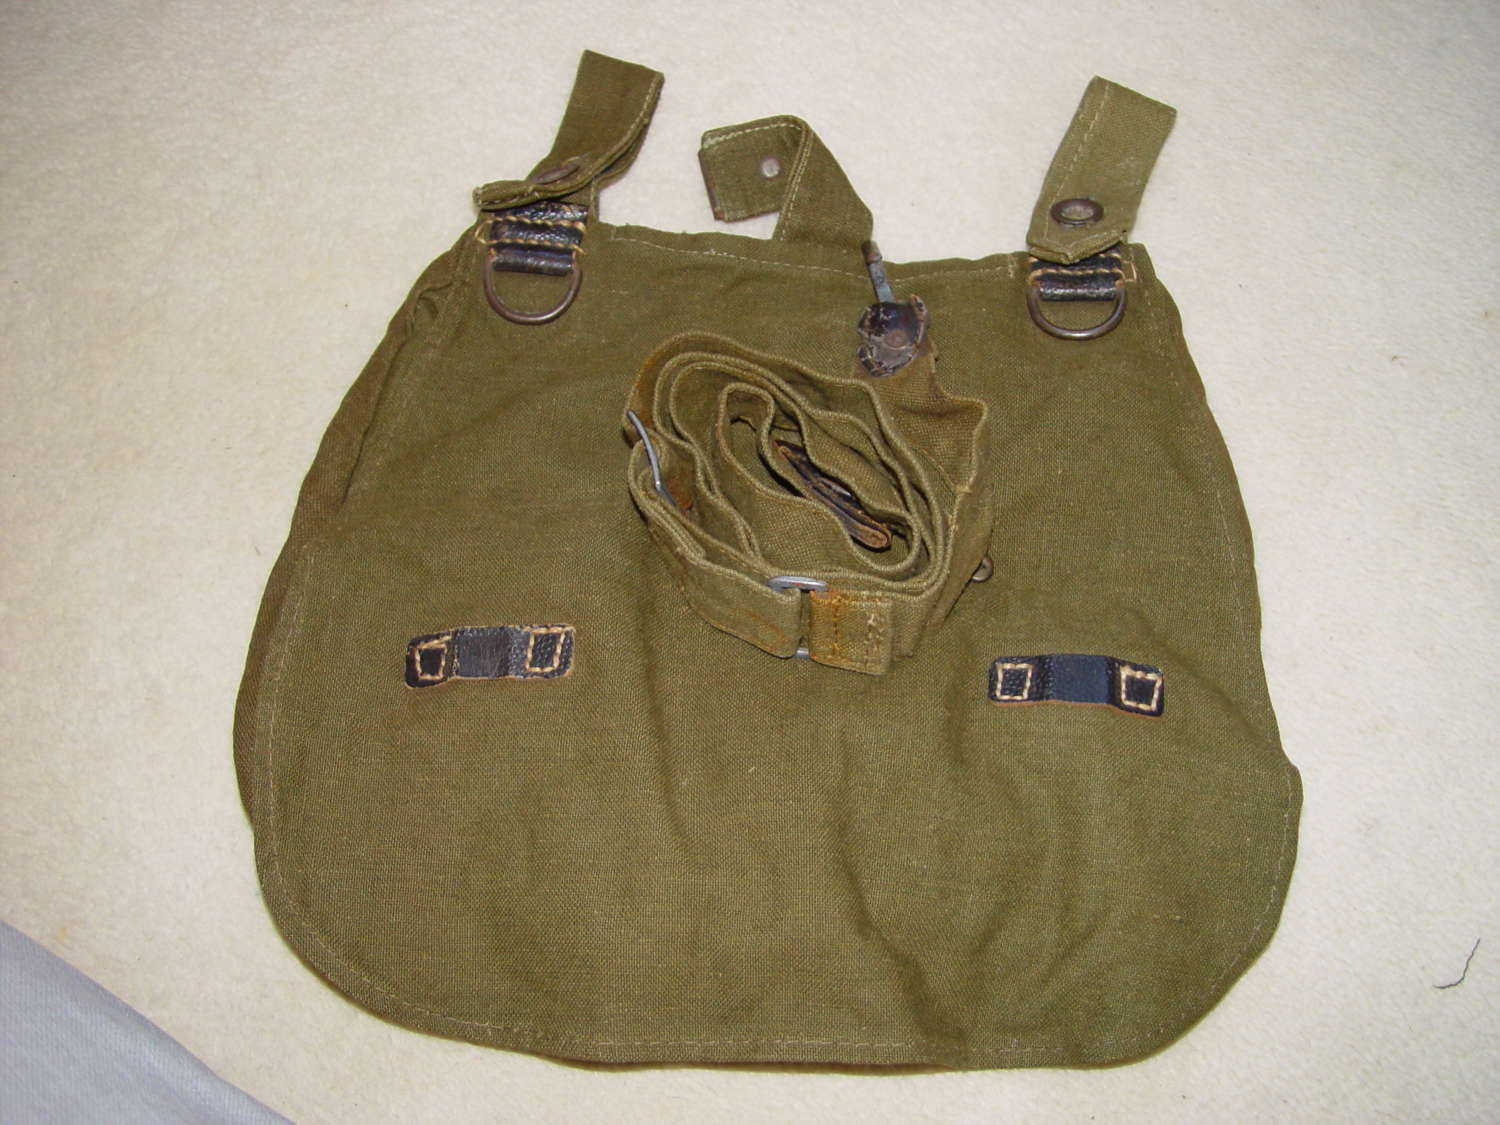 Army bread bag with carrying strap